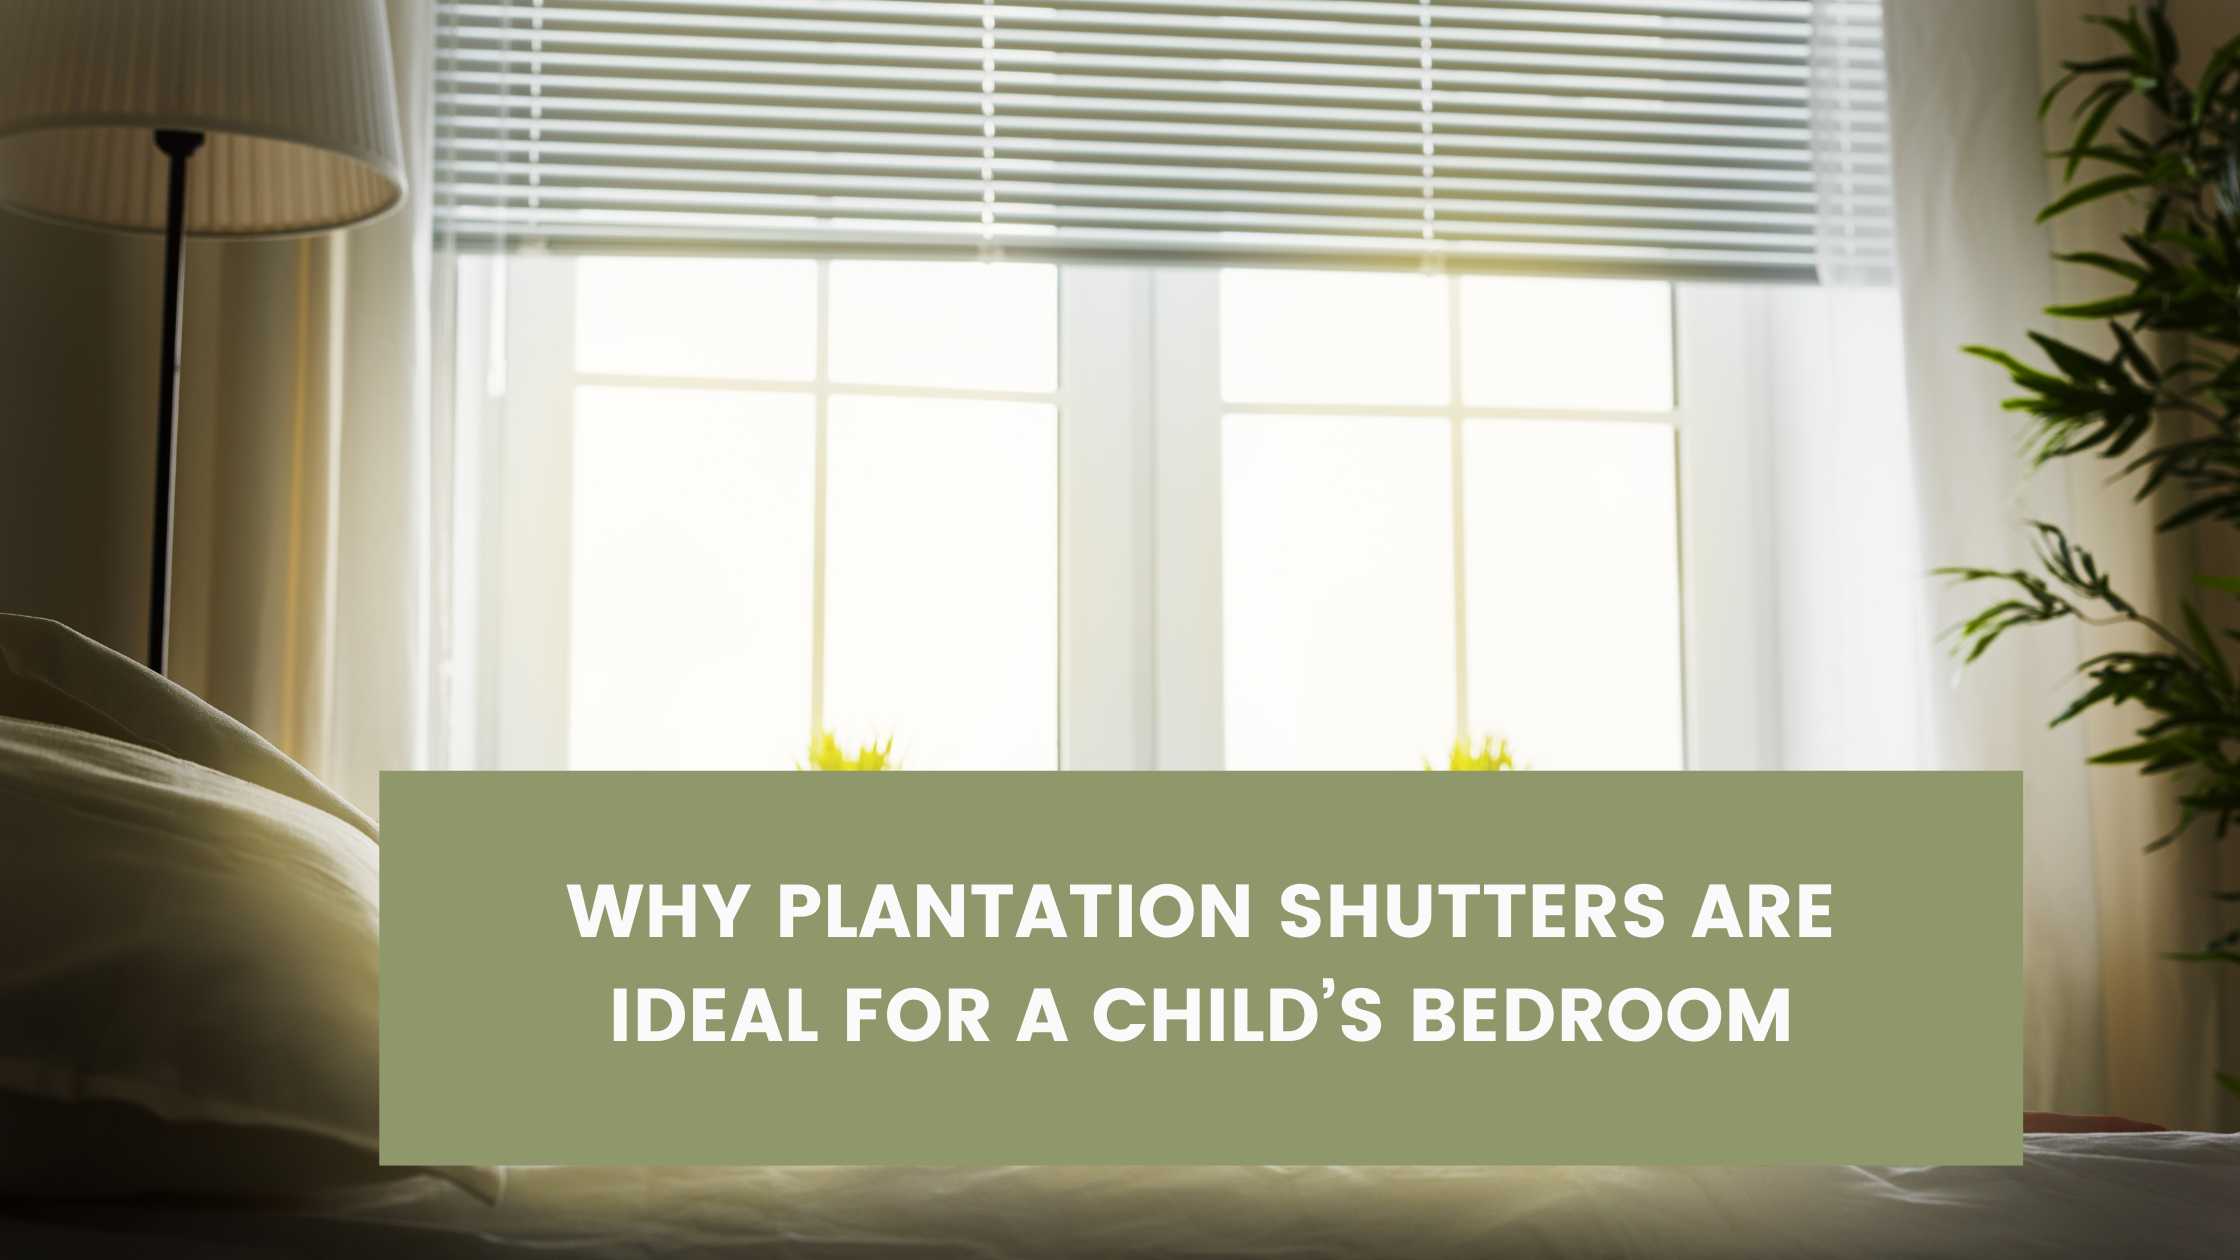 The Benefits of Choosing Plantation Shutters for a Child’s Bedroom or Nursery